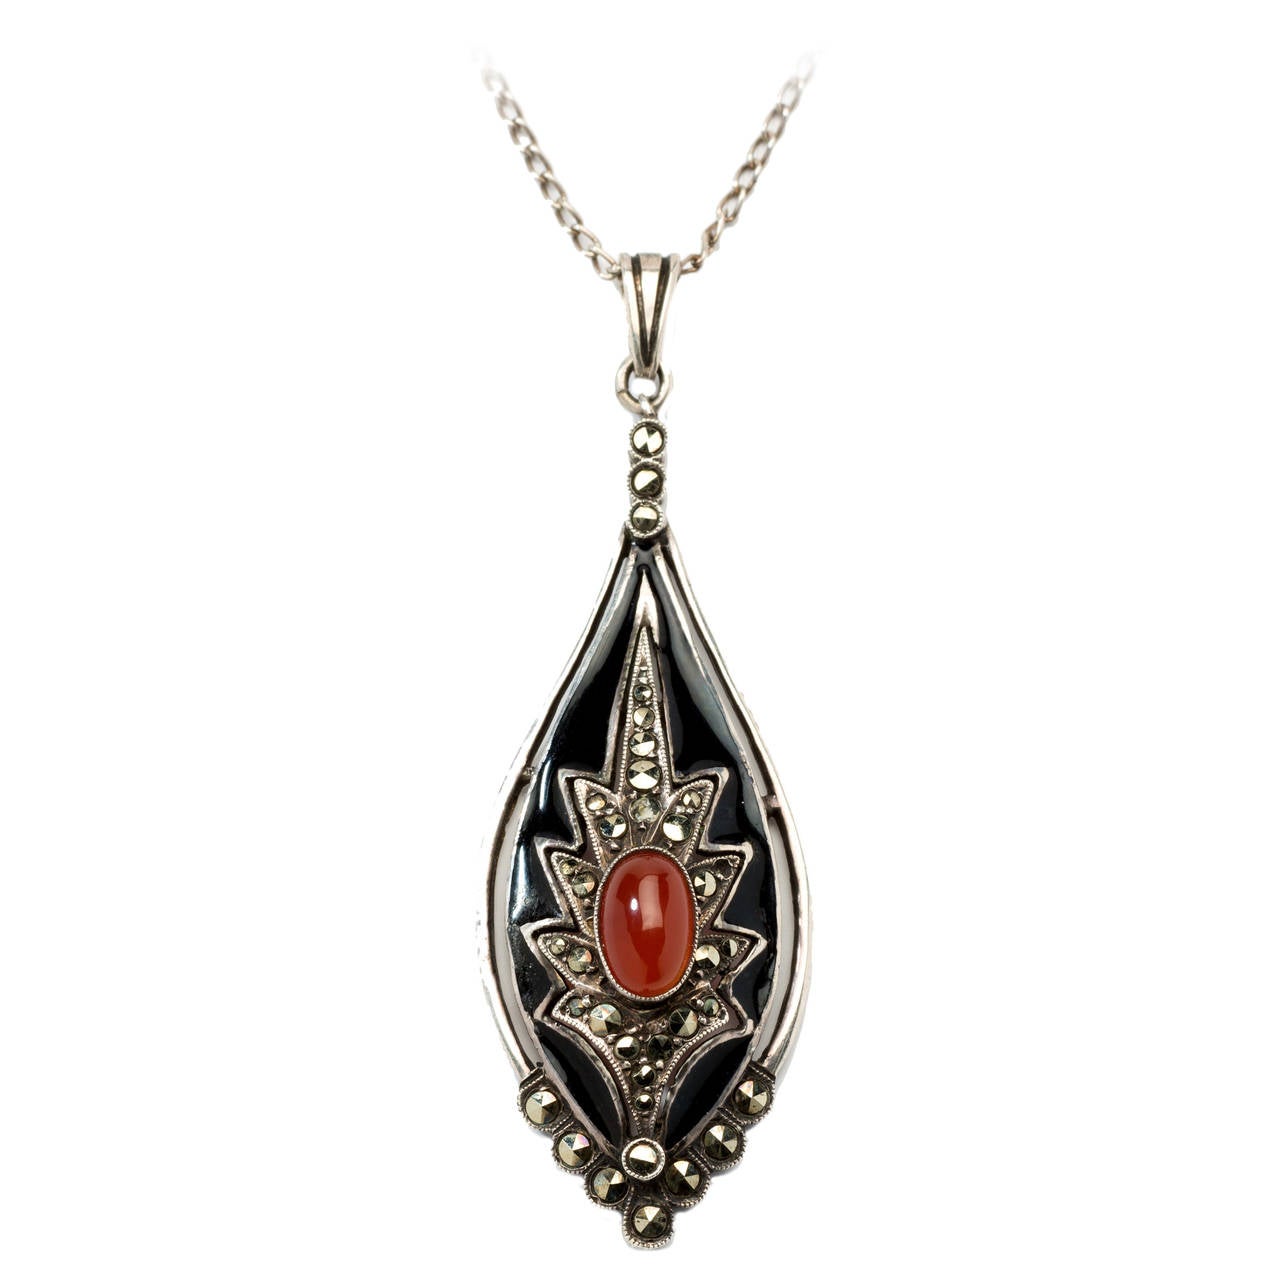 Theodor Fahrner Carnelian Marcasite Silver Pendant and Chain For Sale ...